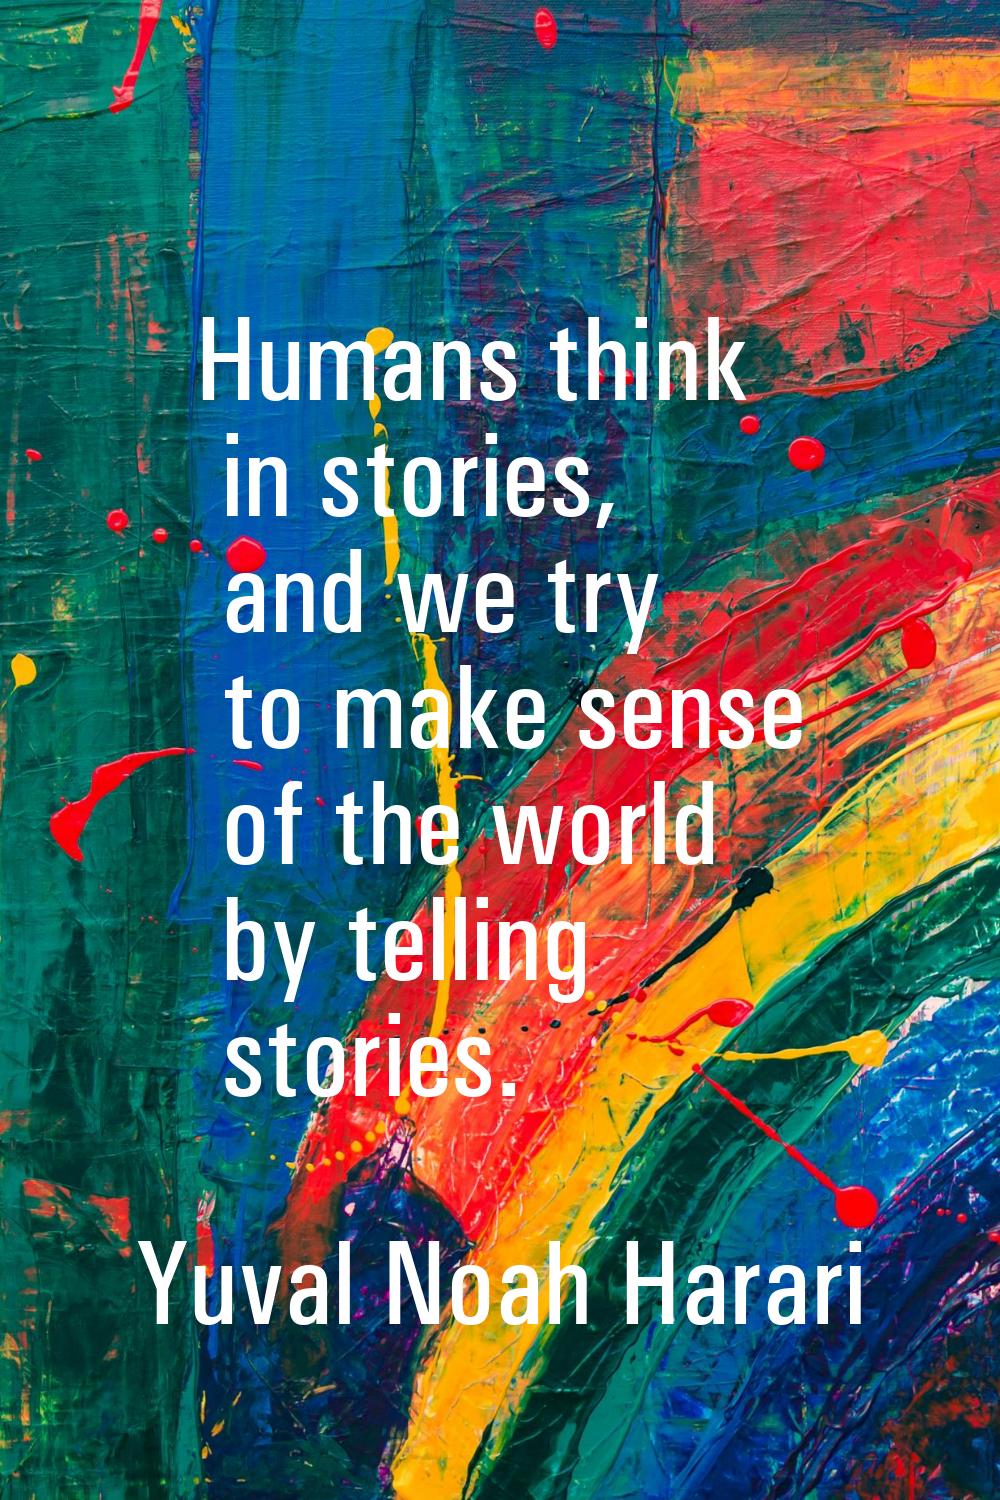 Humans think in stories, and we try to make sense of the world by telling stories.